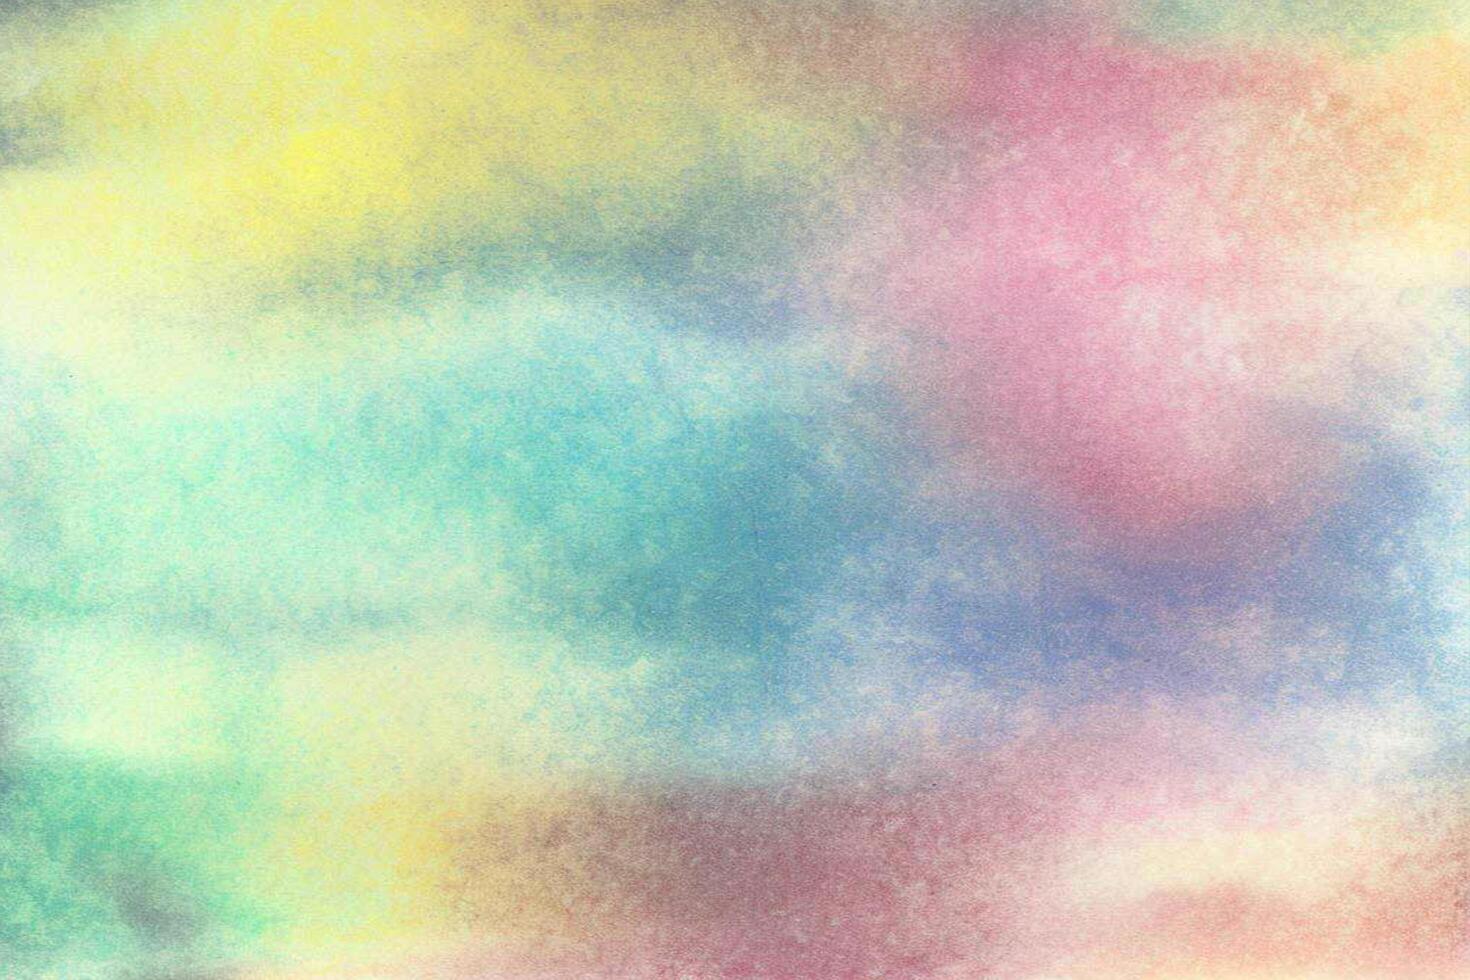 Watercolor pastel background. aquarelle colorful stains on paper. photo